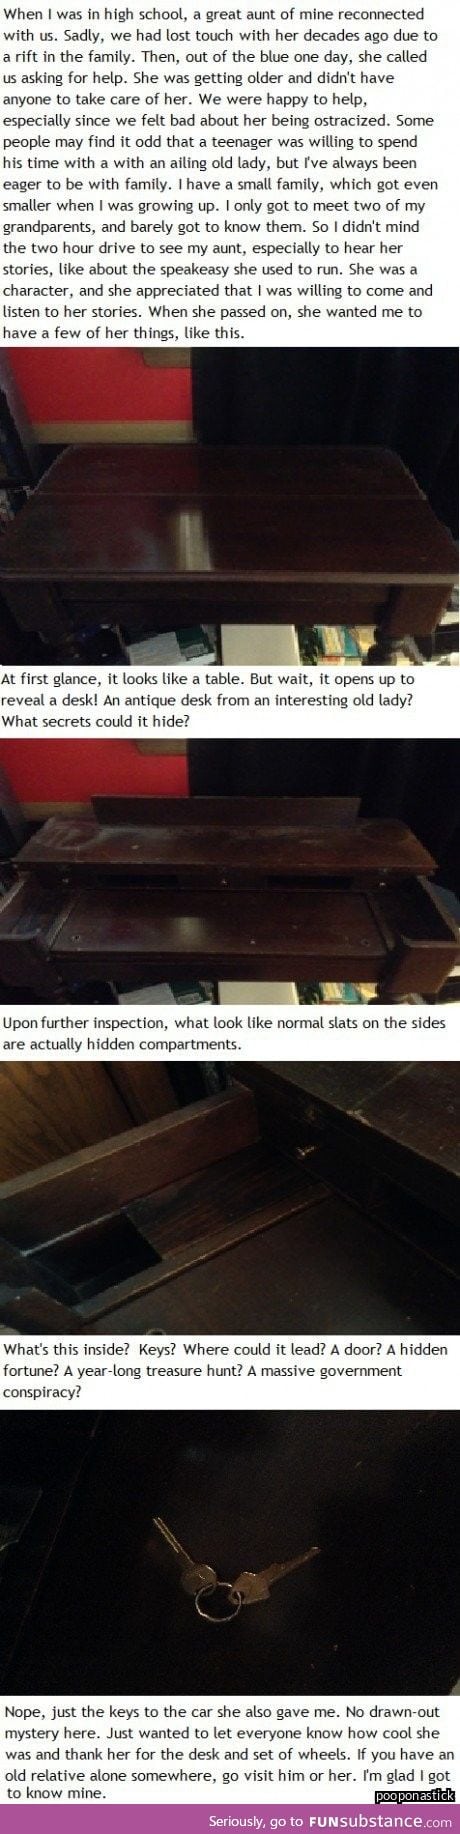 For anyone going through desk withdrawals